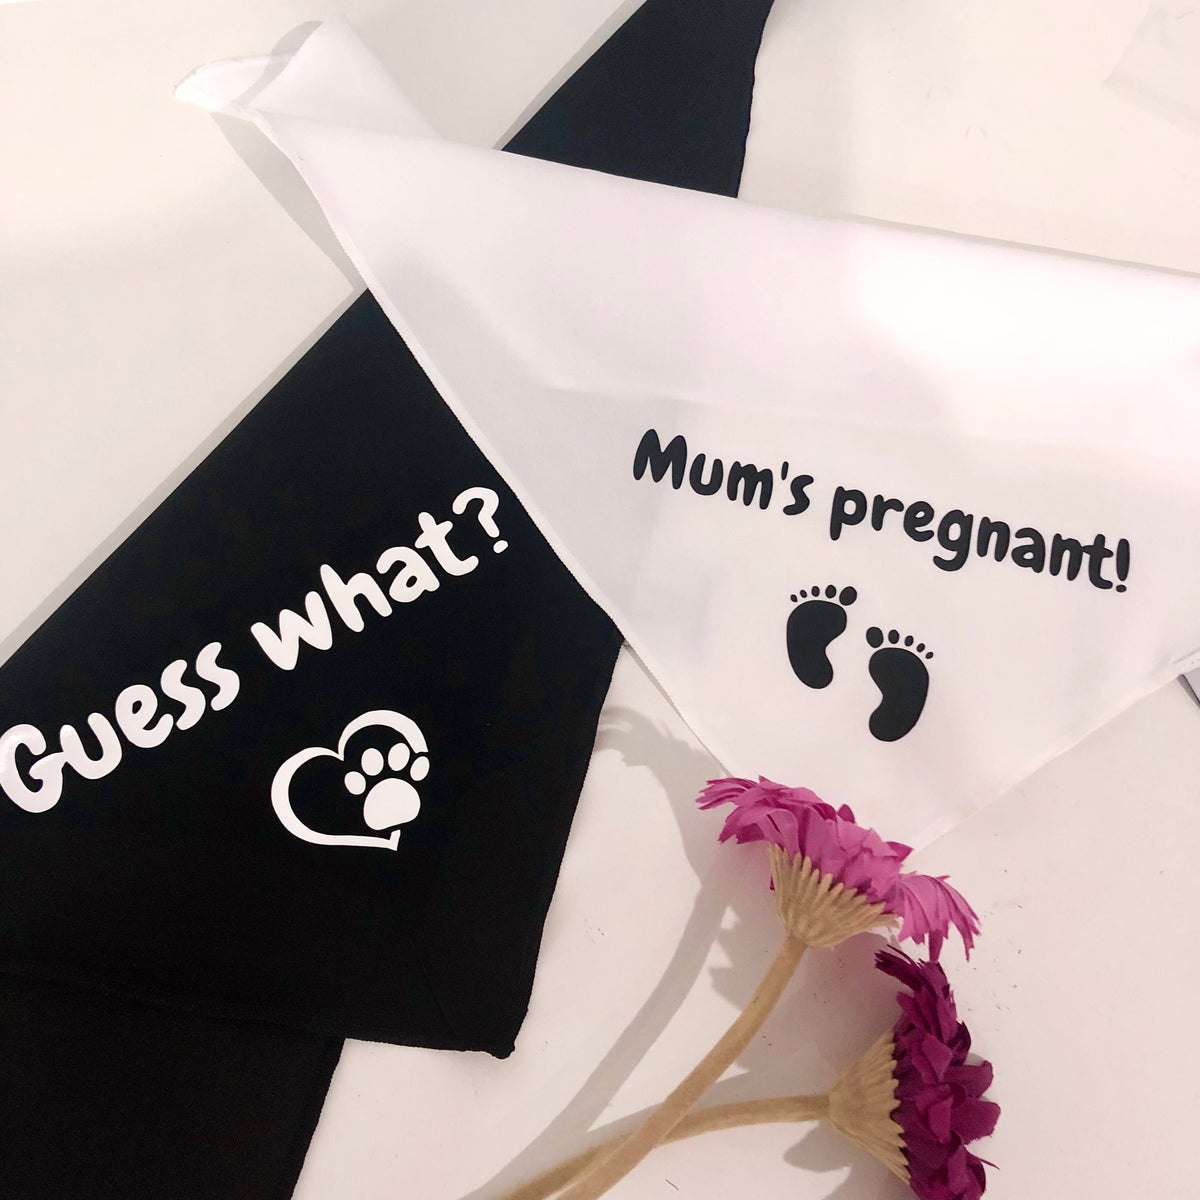 Pregnancy Announcement - Guess what? Mum's Pregnant! - Baby Reveal - Customised due date